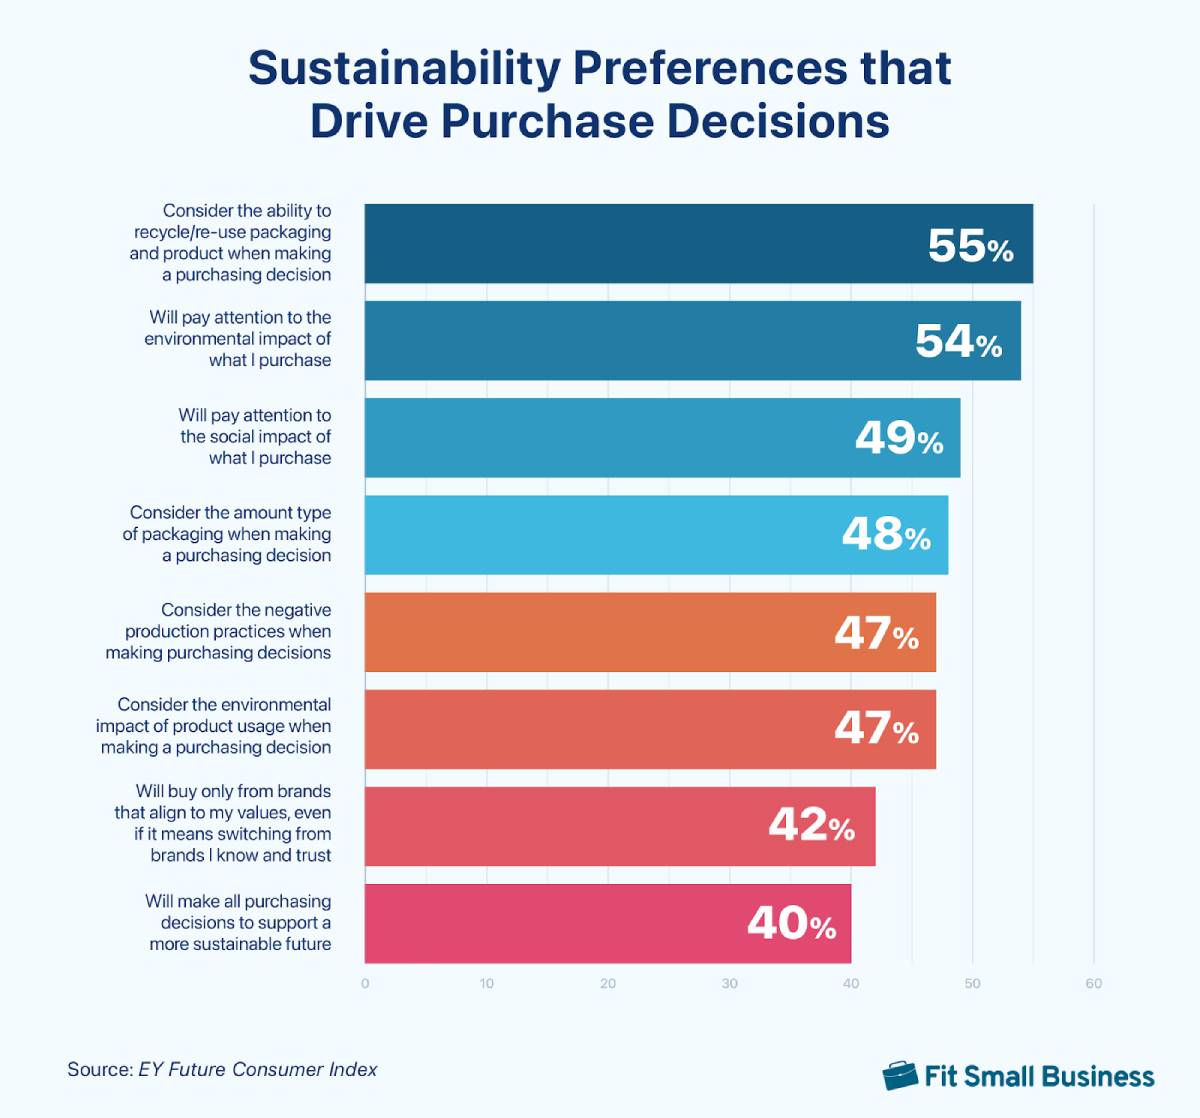 Bar graph of sustainability preferences driving purchase decisions.